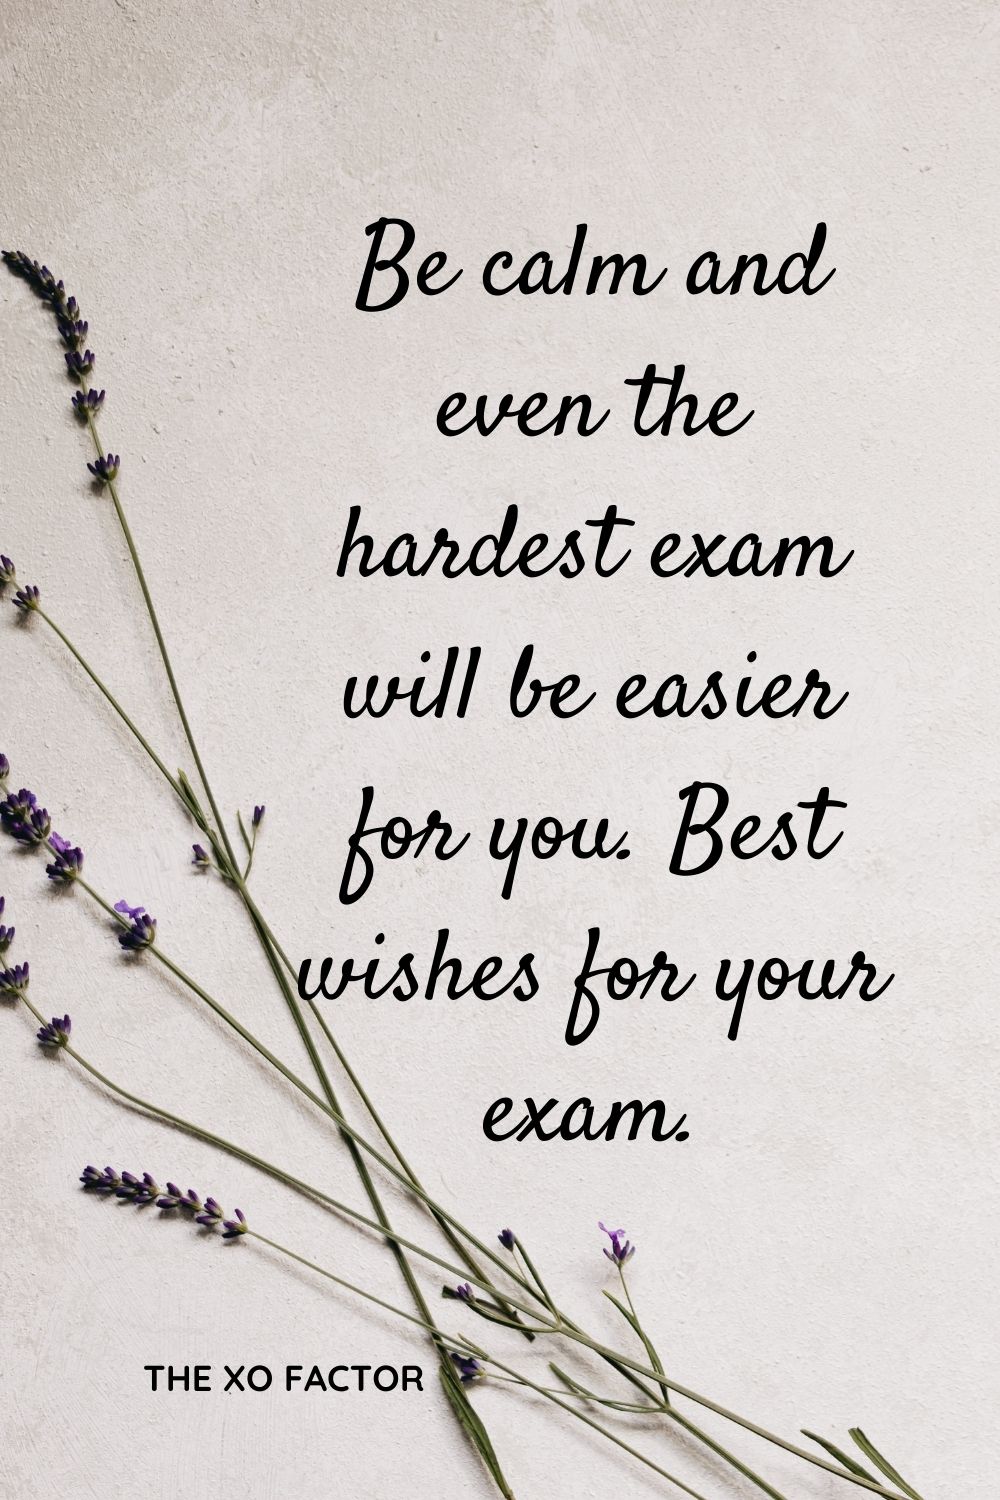 Be calm and even the hardest exam will be easier for you. Best wishes for your exam.